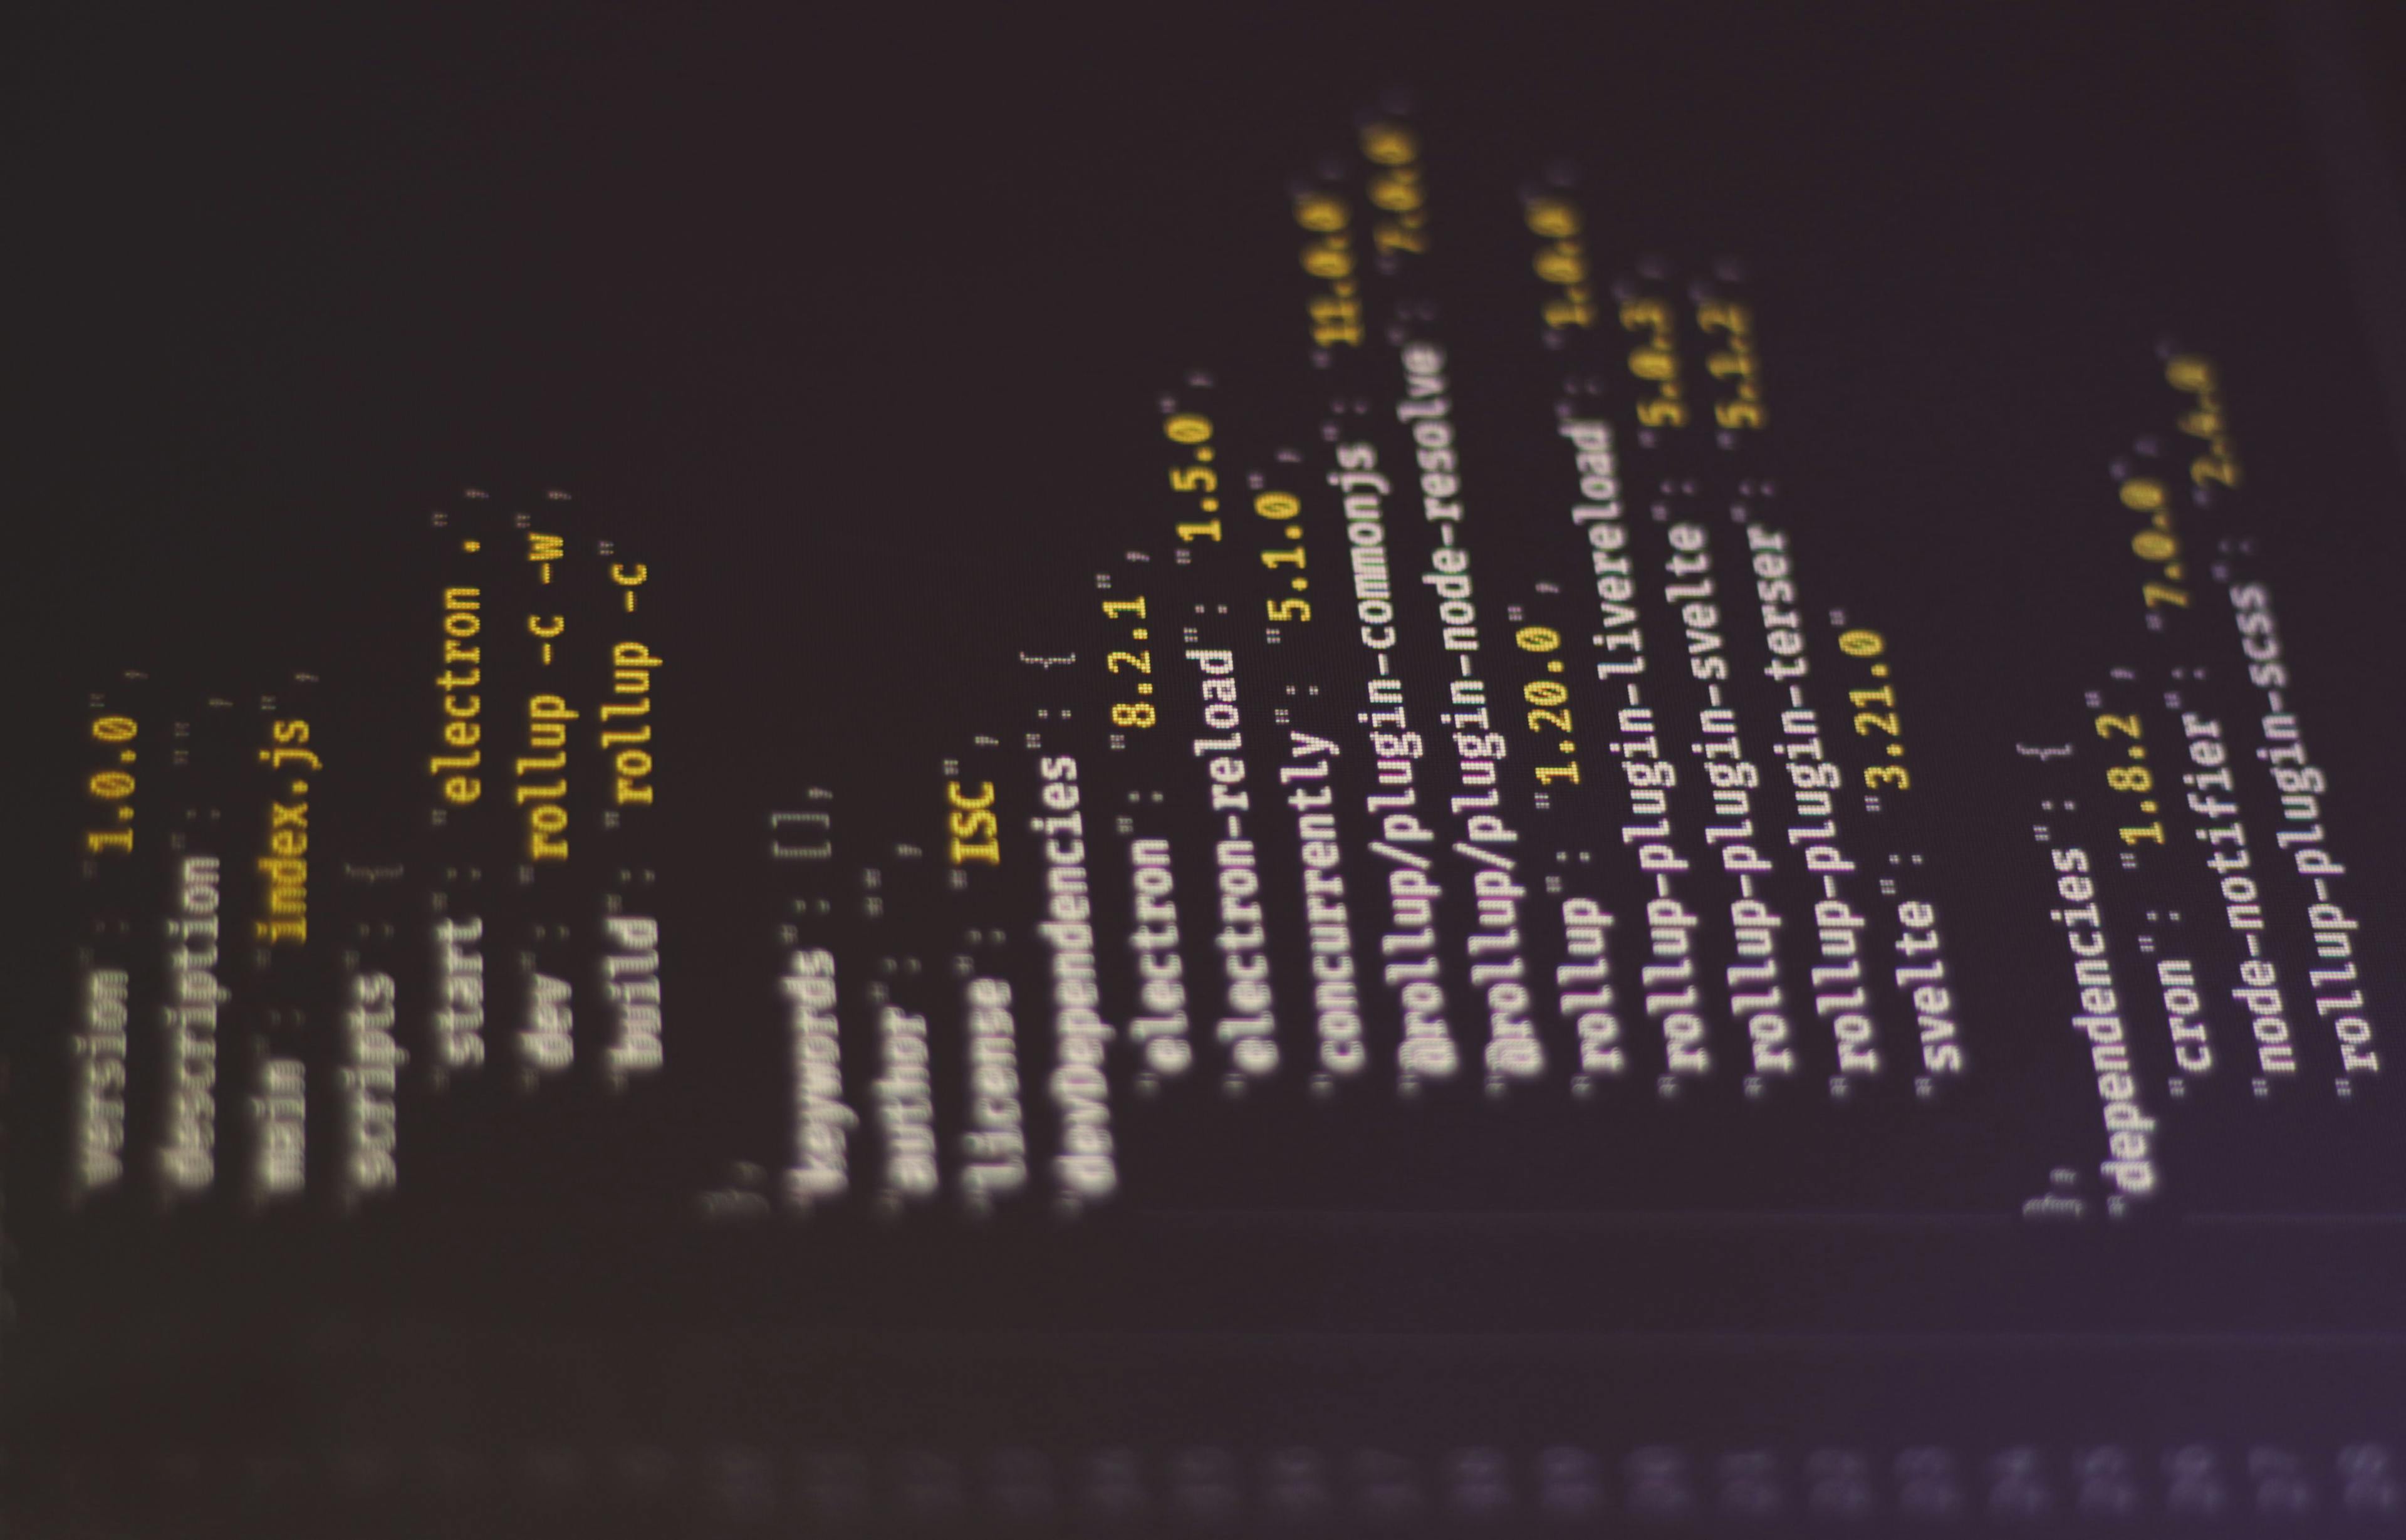 JSON (JavaScript Object Notation) is a common format for semi-structured data. Photo by Ferenc Almasi on Unsplash.